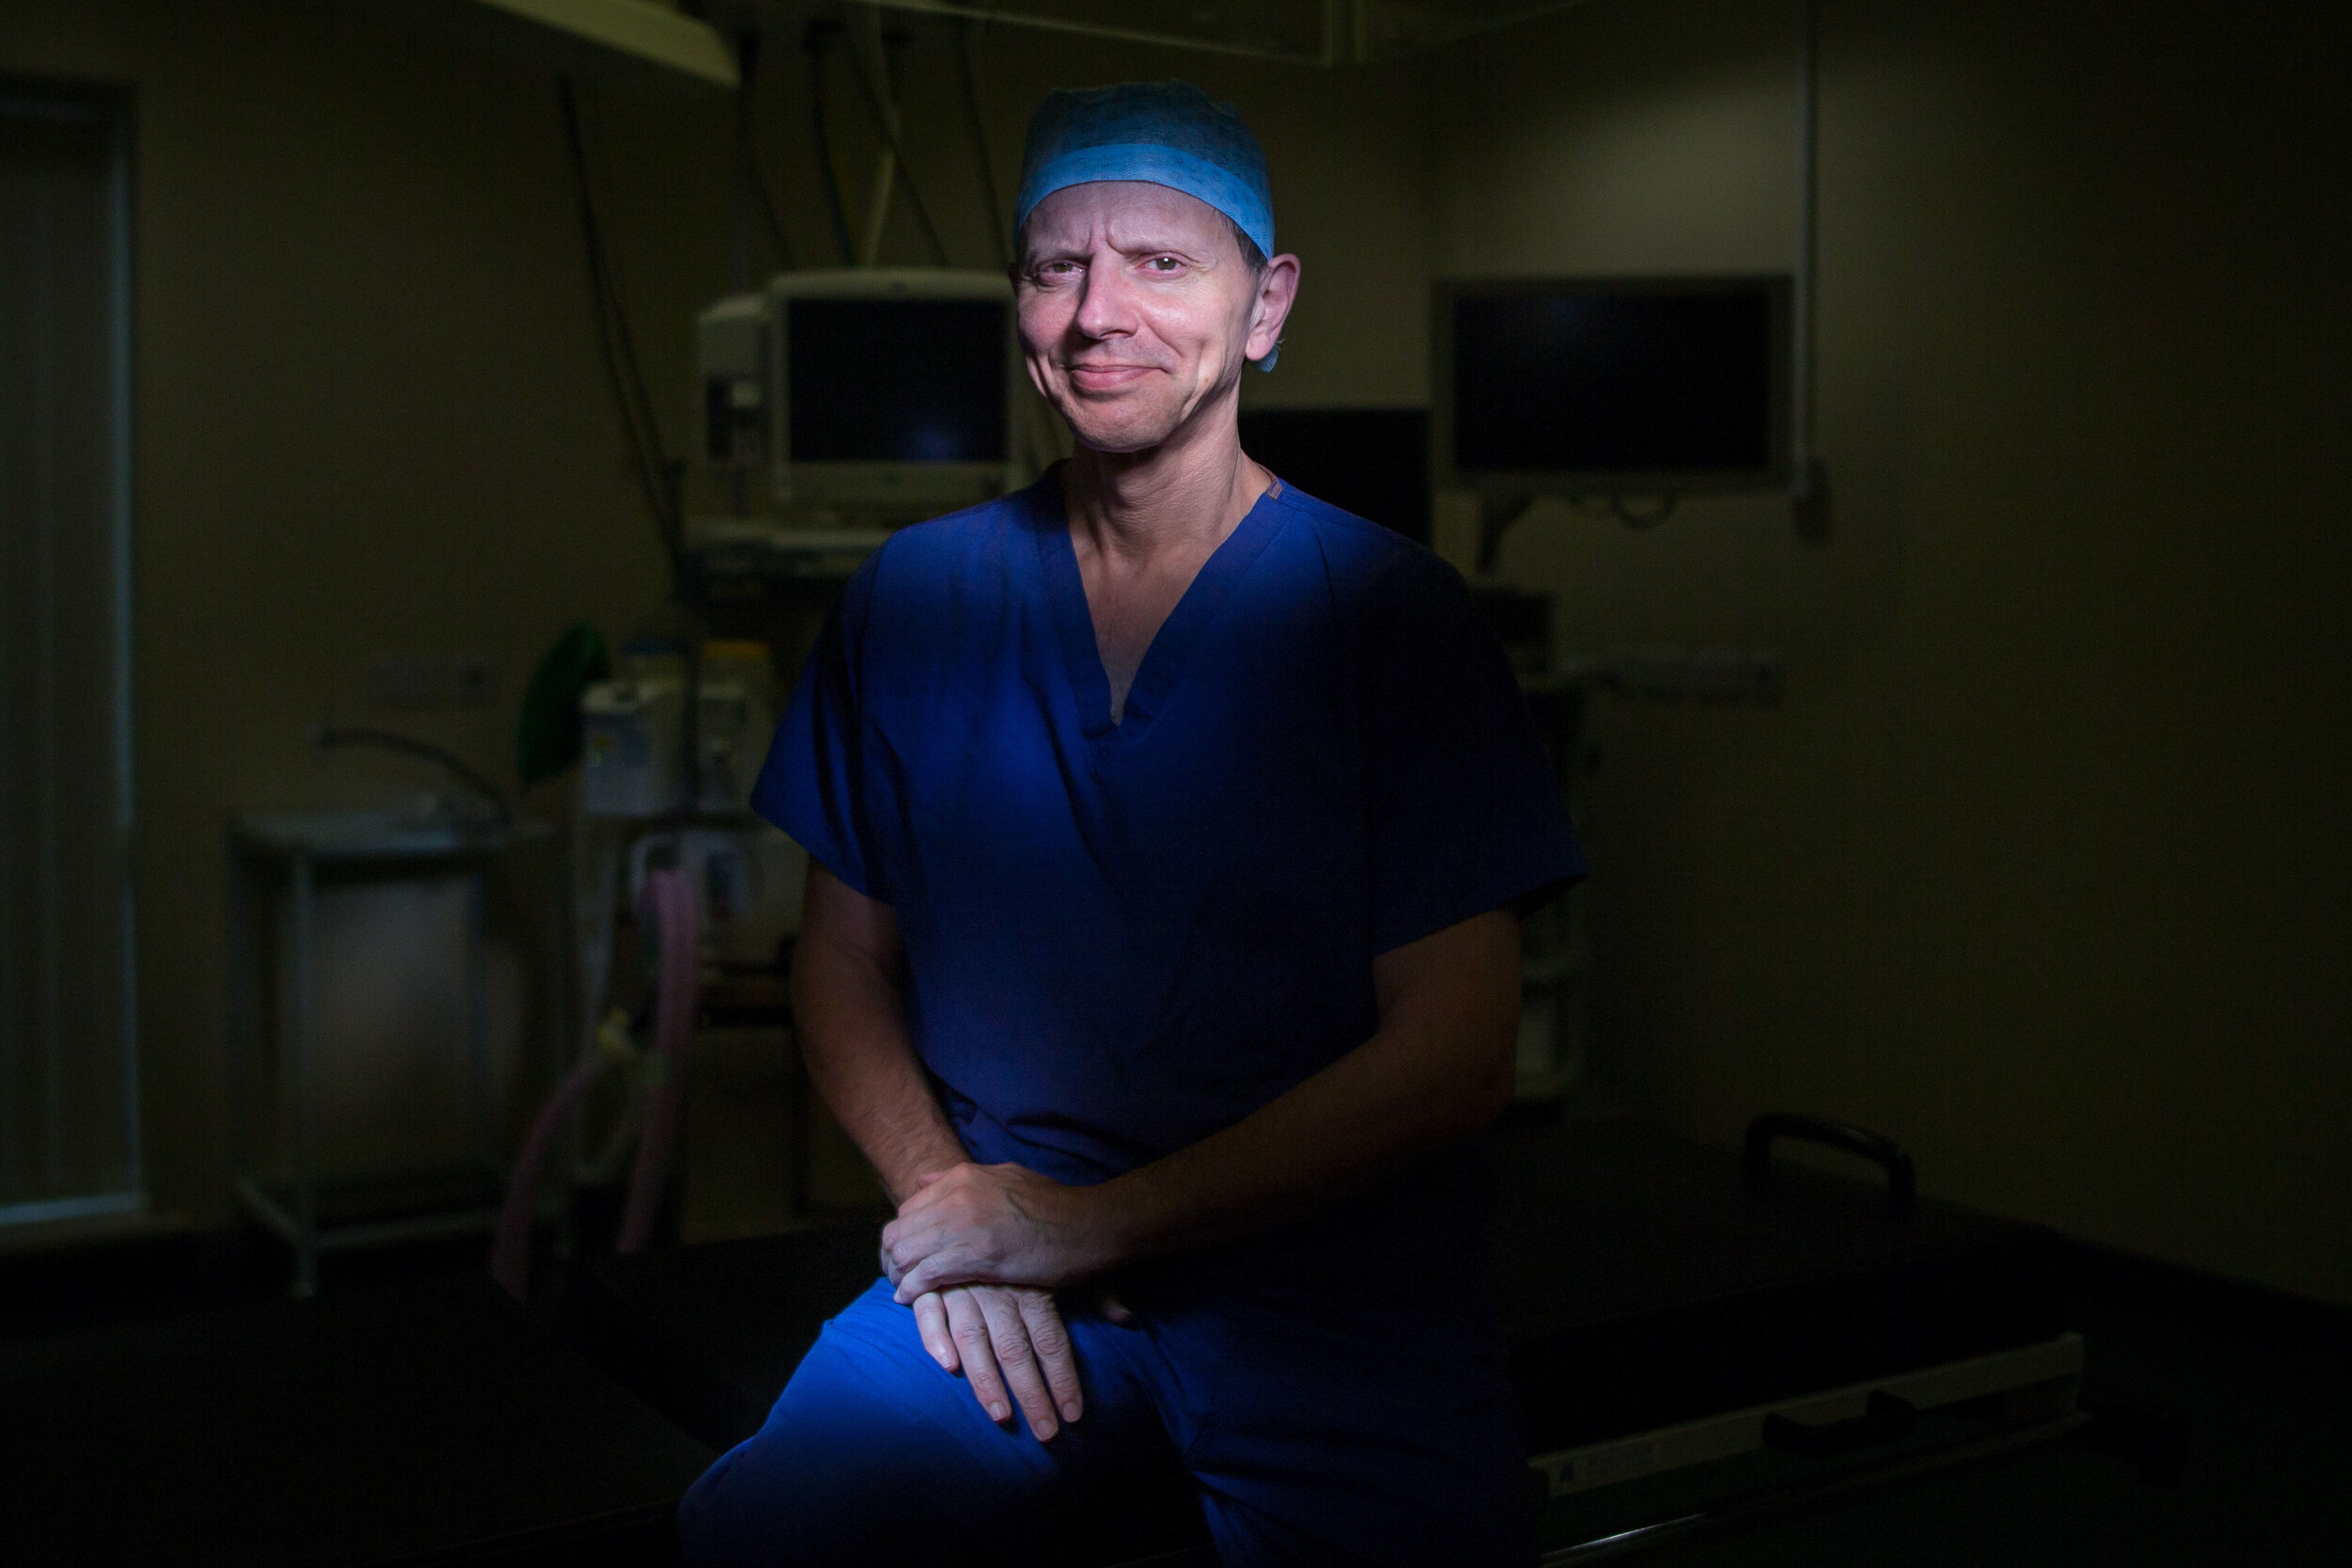  Carlos Heras-Palou, 53, performing hand surgery at Derby Nuffield Hospital. Mr Heras-Palou, an orthopaedic specialist surgeon, may have had his career saved by a new drug called 'Patisiran'. The rare disease, hereditary transthyretin-mediated amyloi